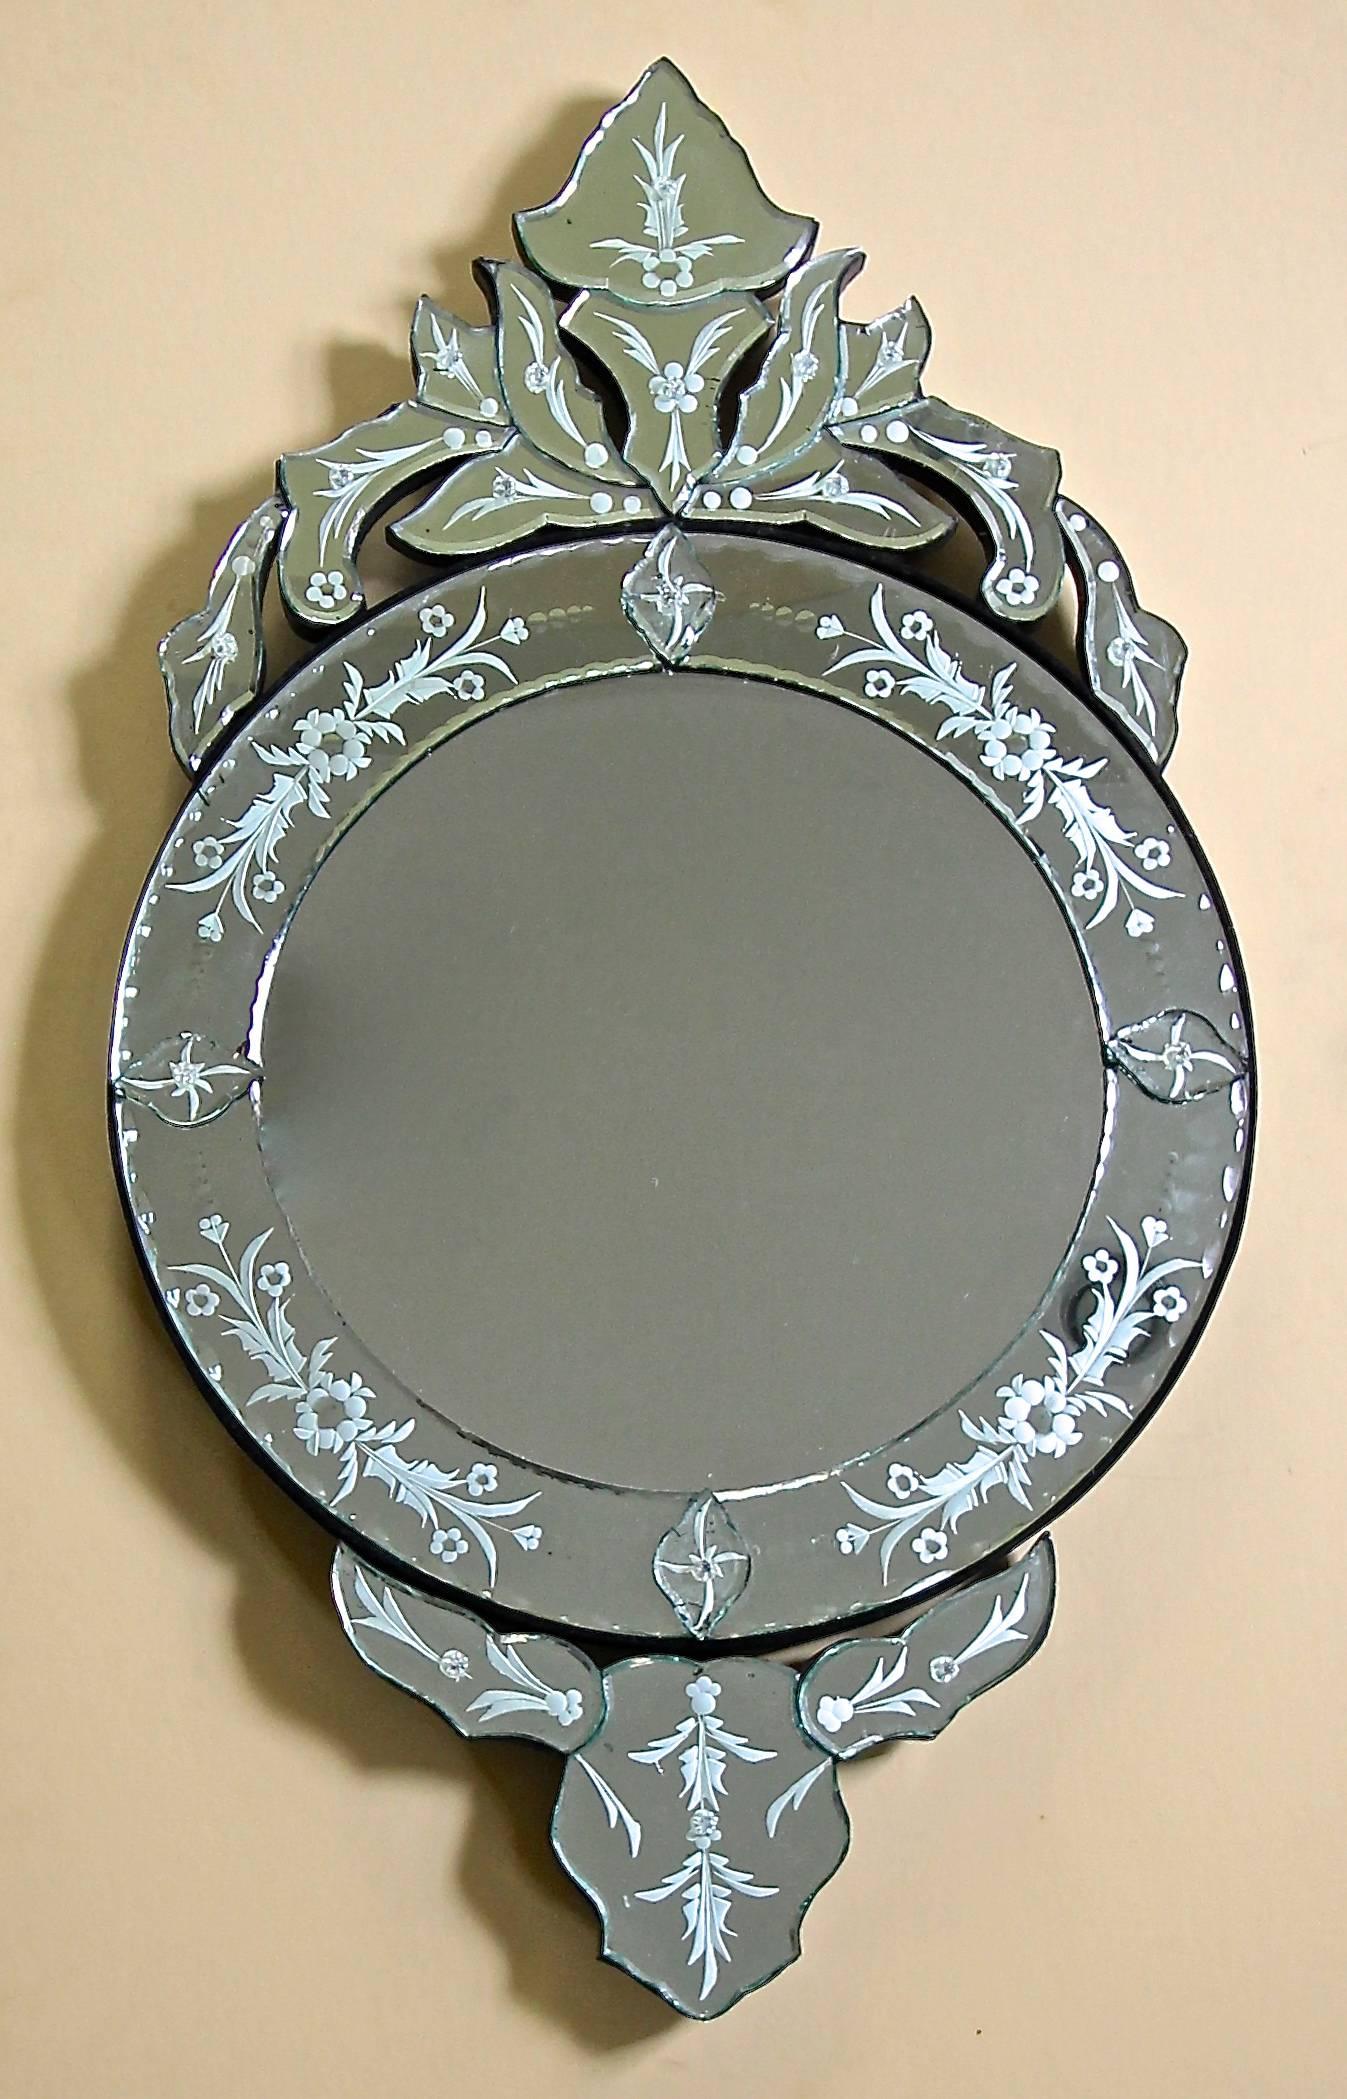 Vintage Venetian Italian wall mirror with reverse etched decoration. Circular central mirror with vertical decoration.